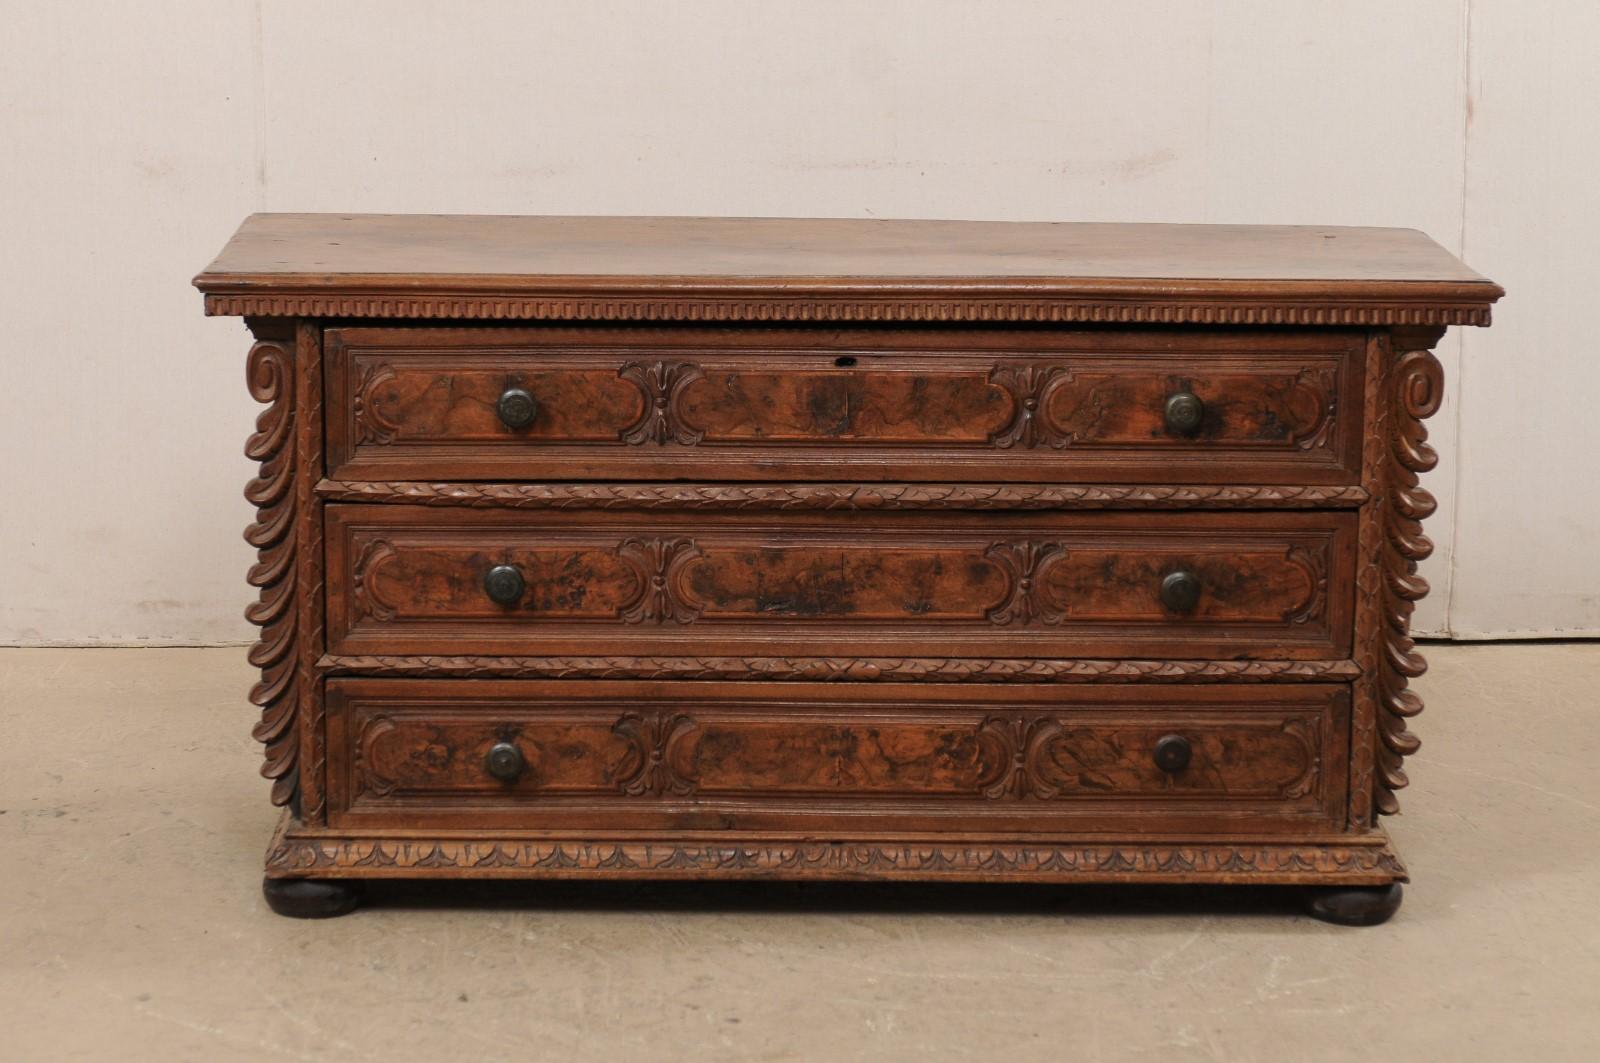 Hand-Carved Fabulous Italian Early 18th C. Walnut Chest of Drawers Beautifully Carved